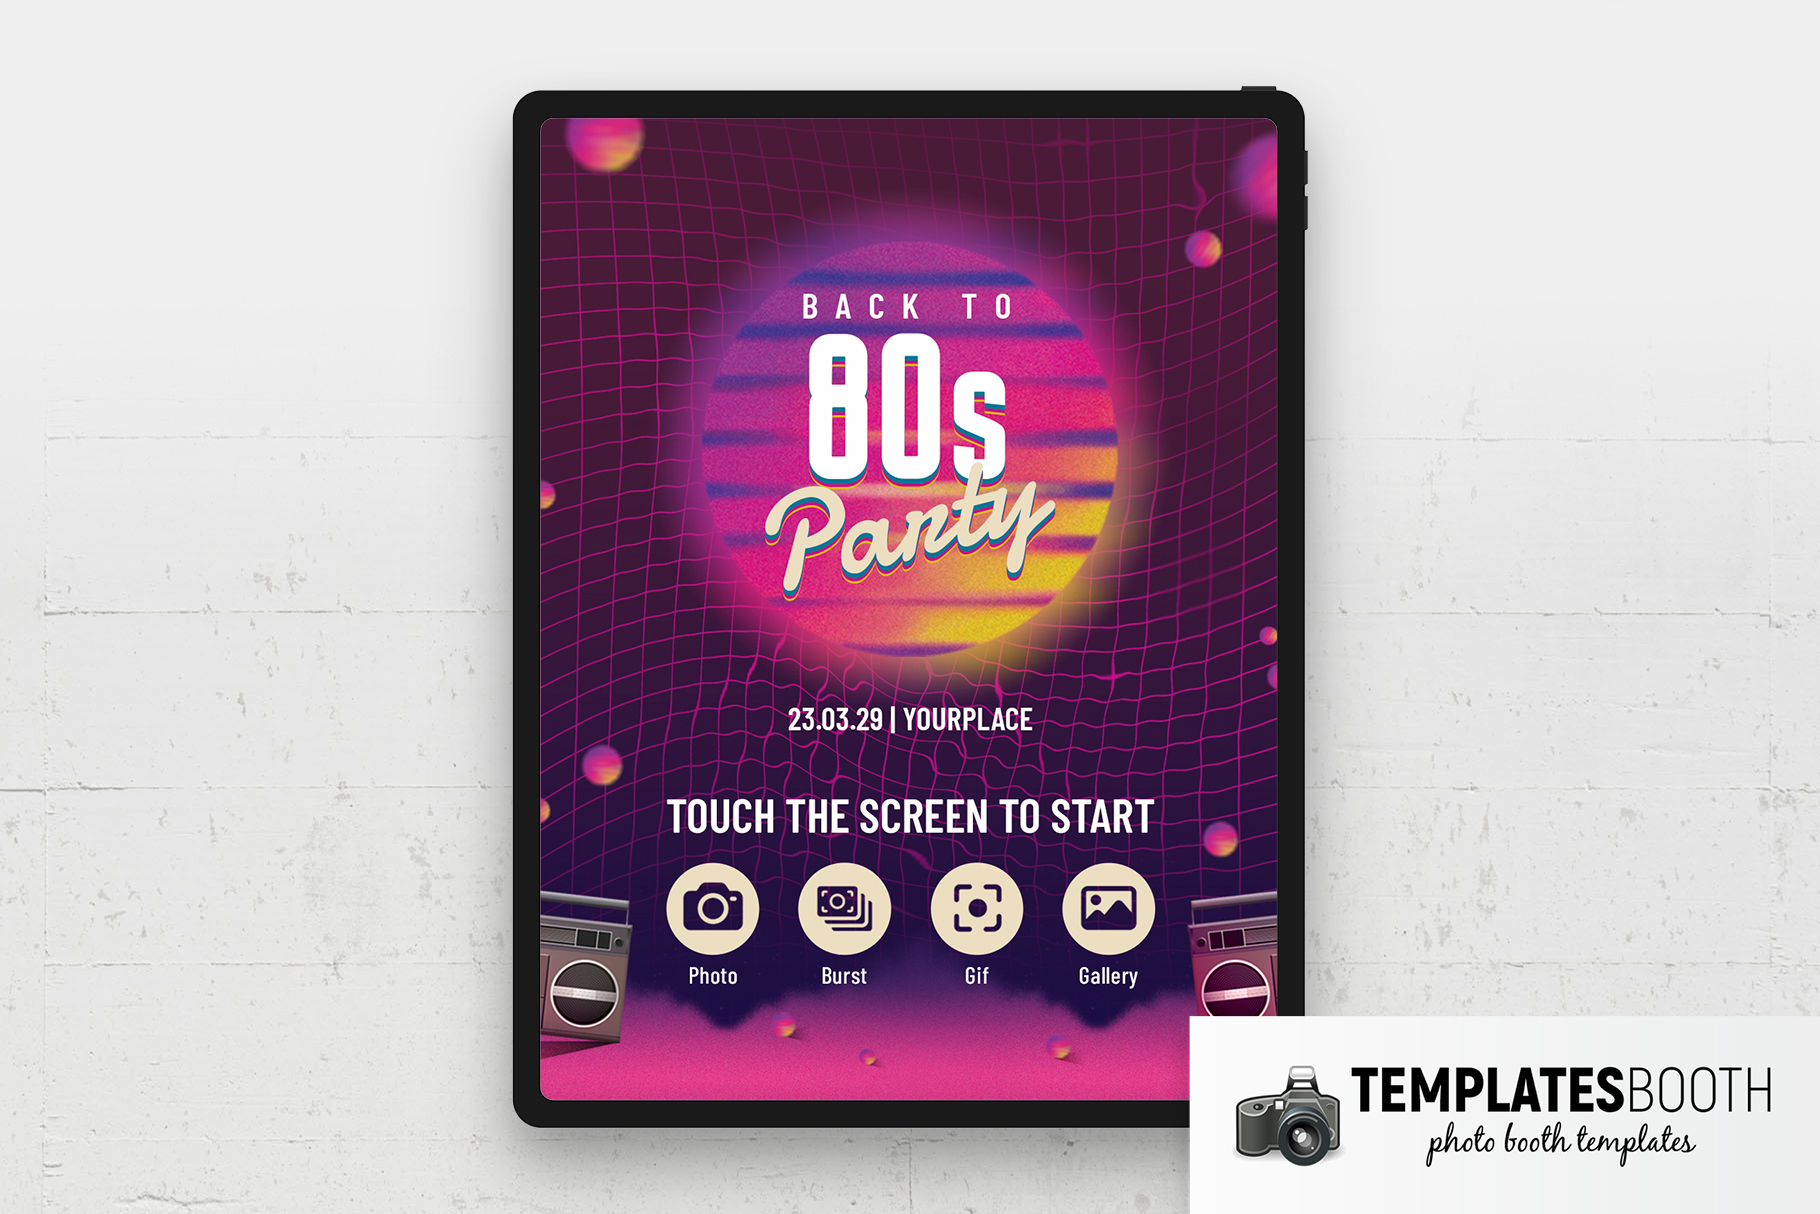 80s Party Photo Booth Welcome Screen